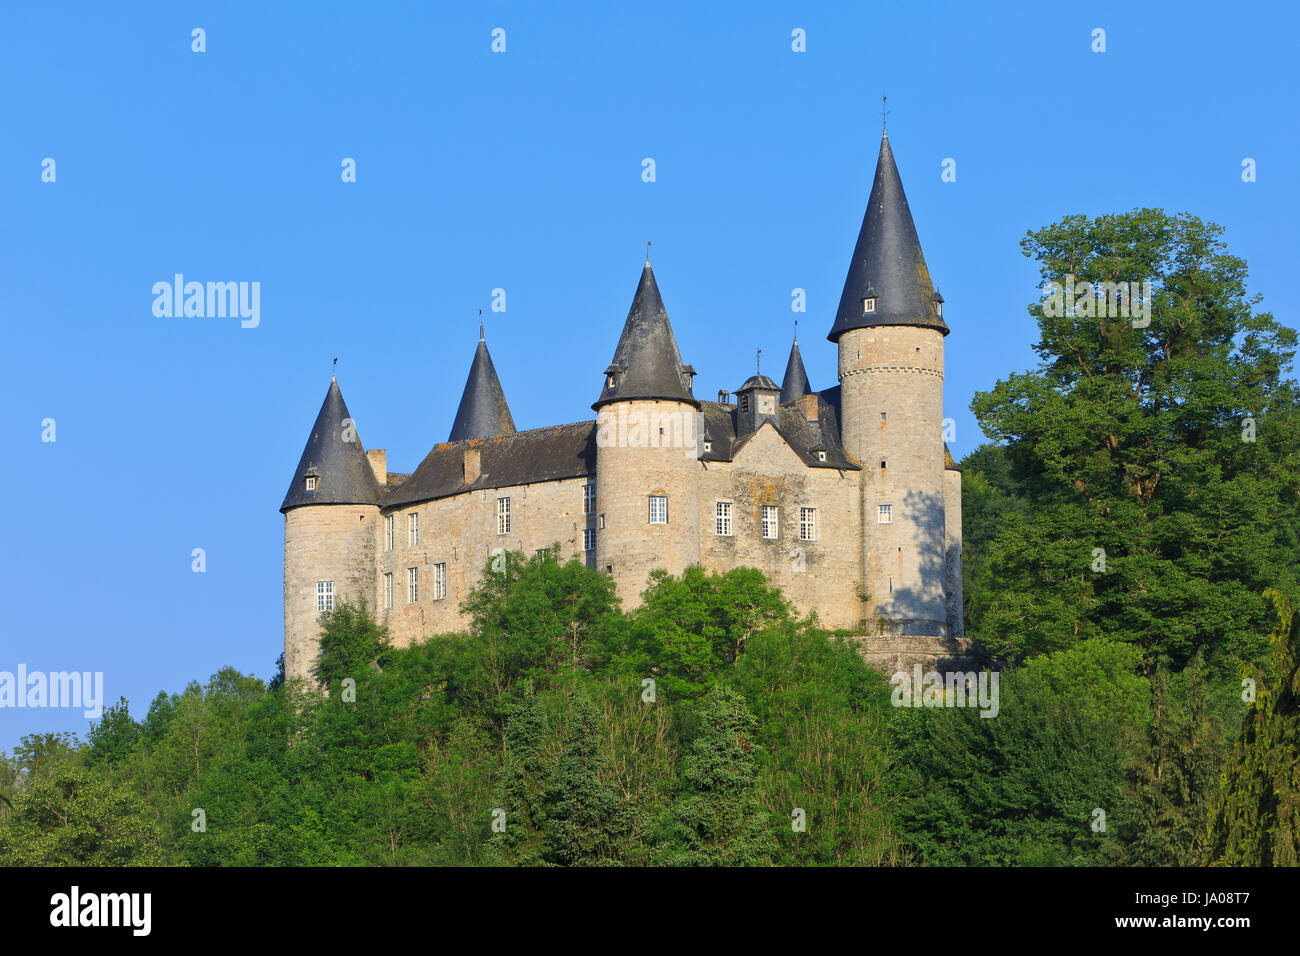 The Castle of Veves (1410) in Celles, Belgium Stock Photo